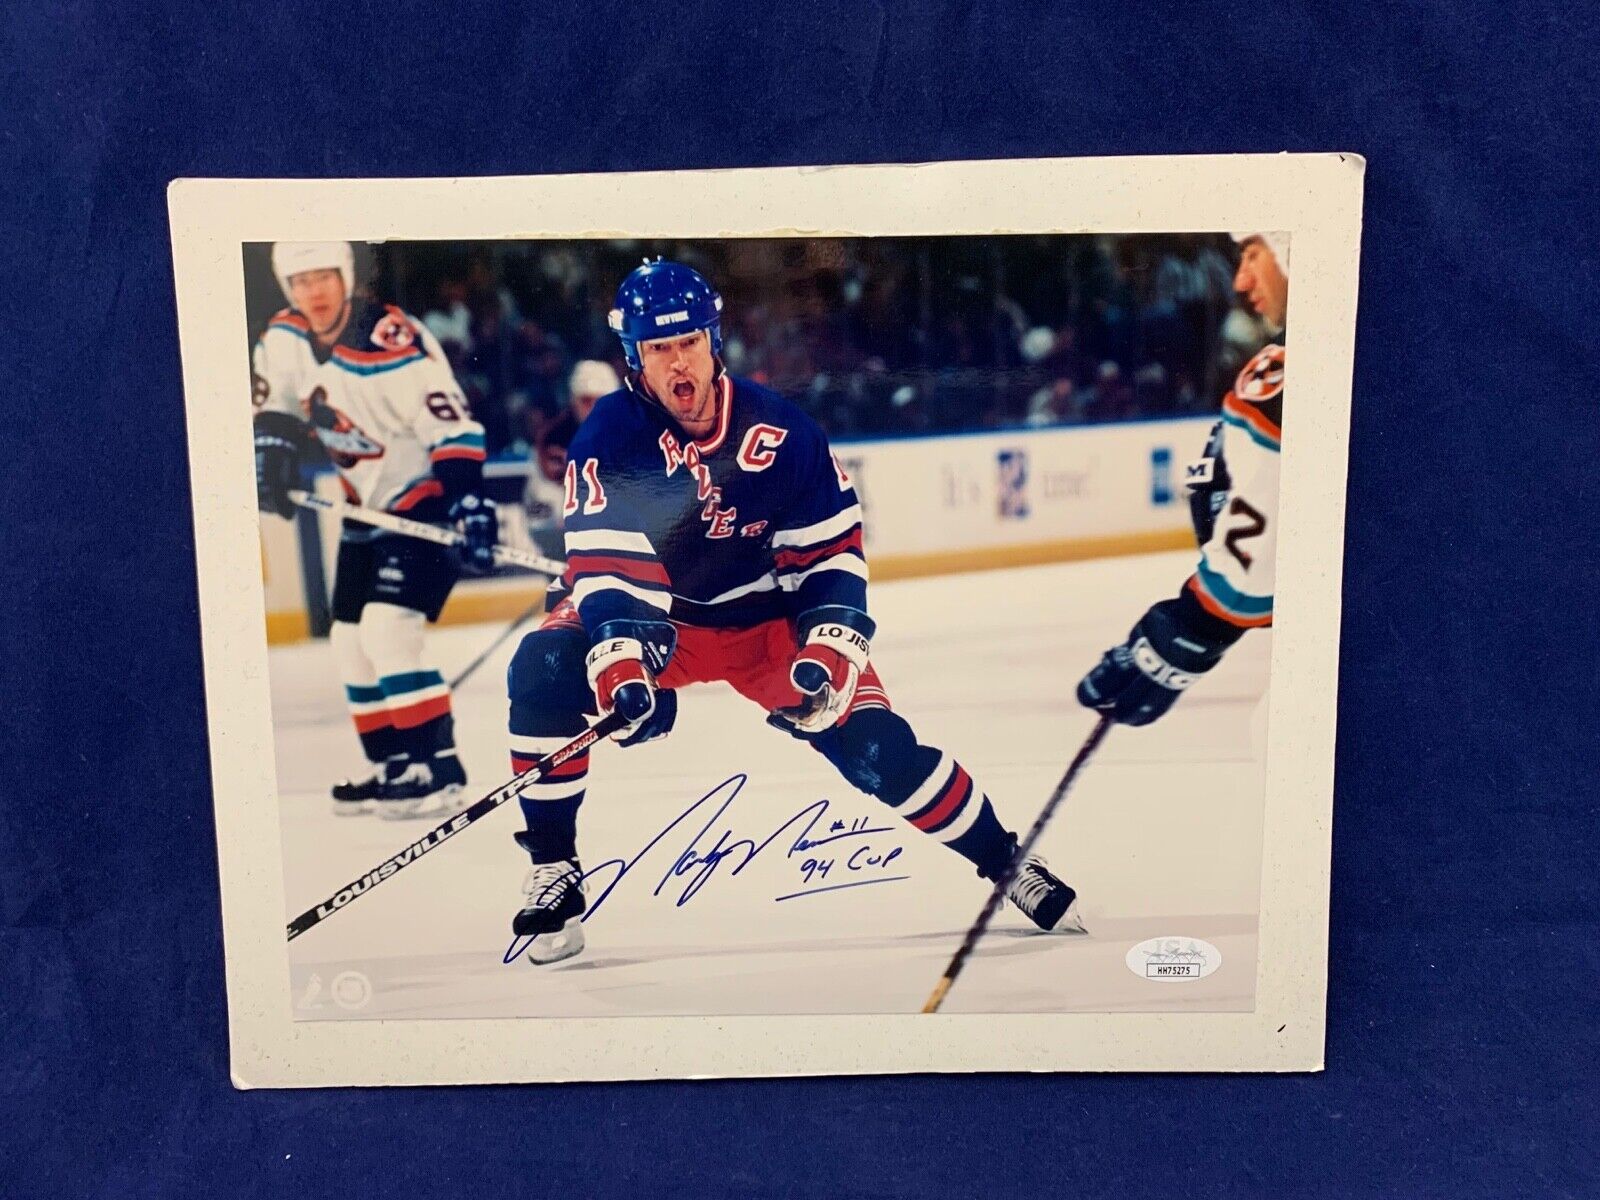 Mark Messier Stanley Cup 1994 Autographed 8x10 Pressed Photo JSA COA HH75275